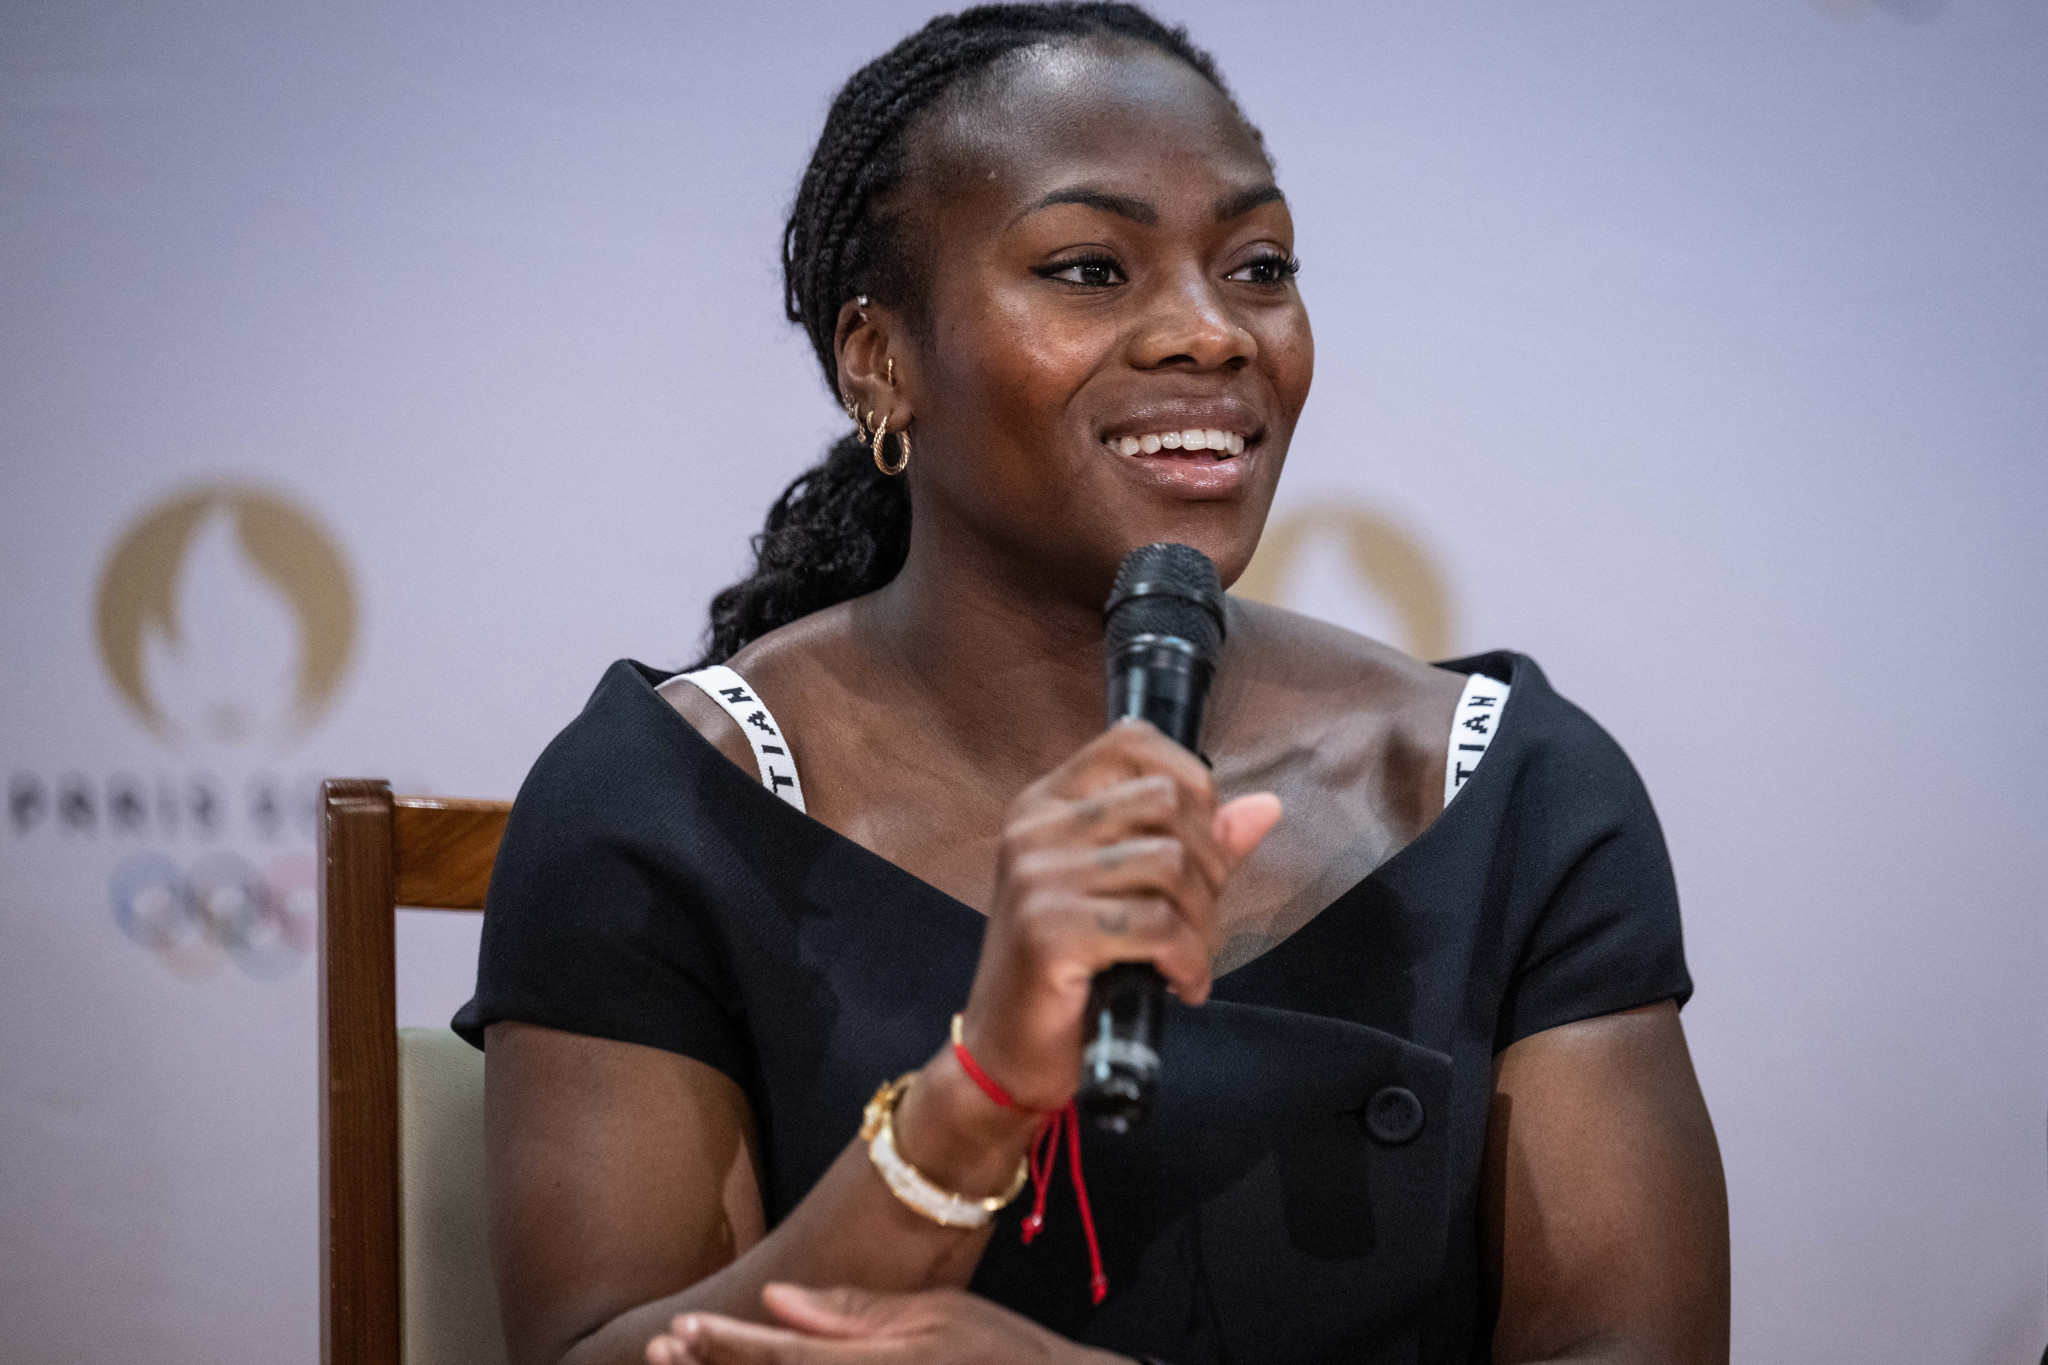 Agbegnenou happy with decision to provide hotel rooms for breastfeeding athletes. GETTY IMAGES